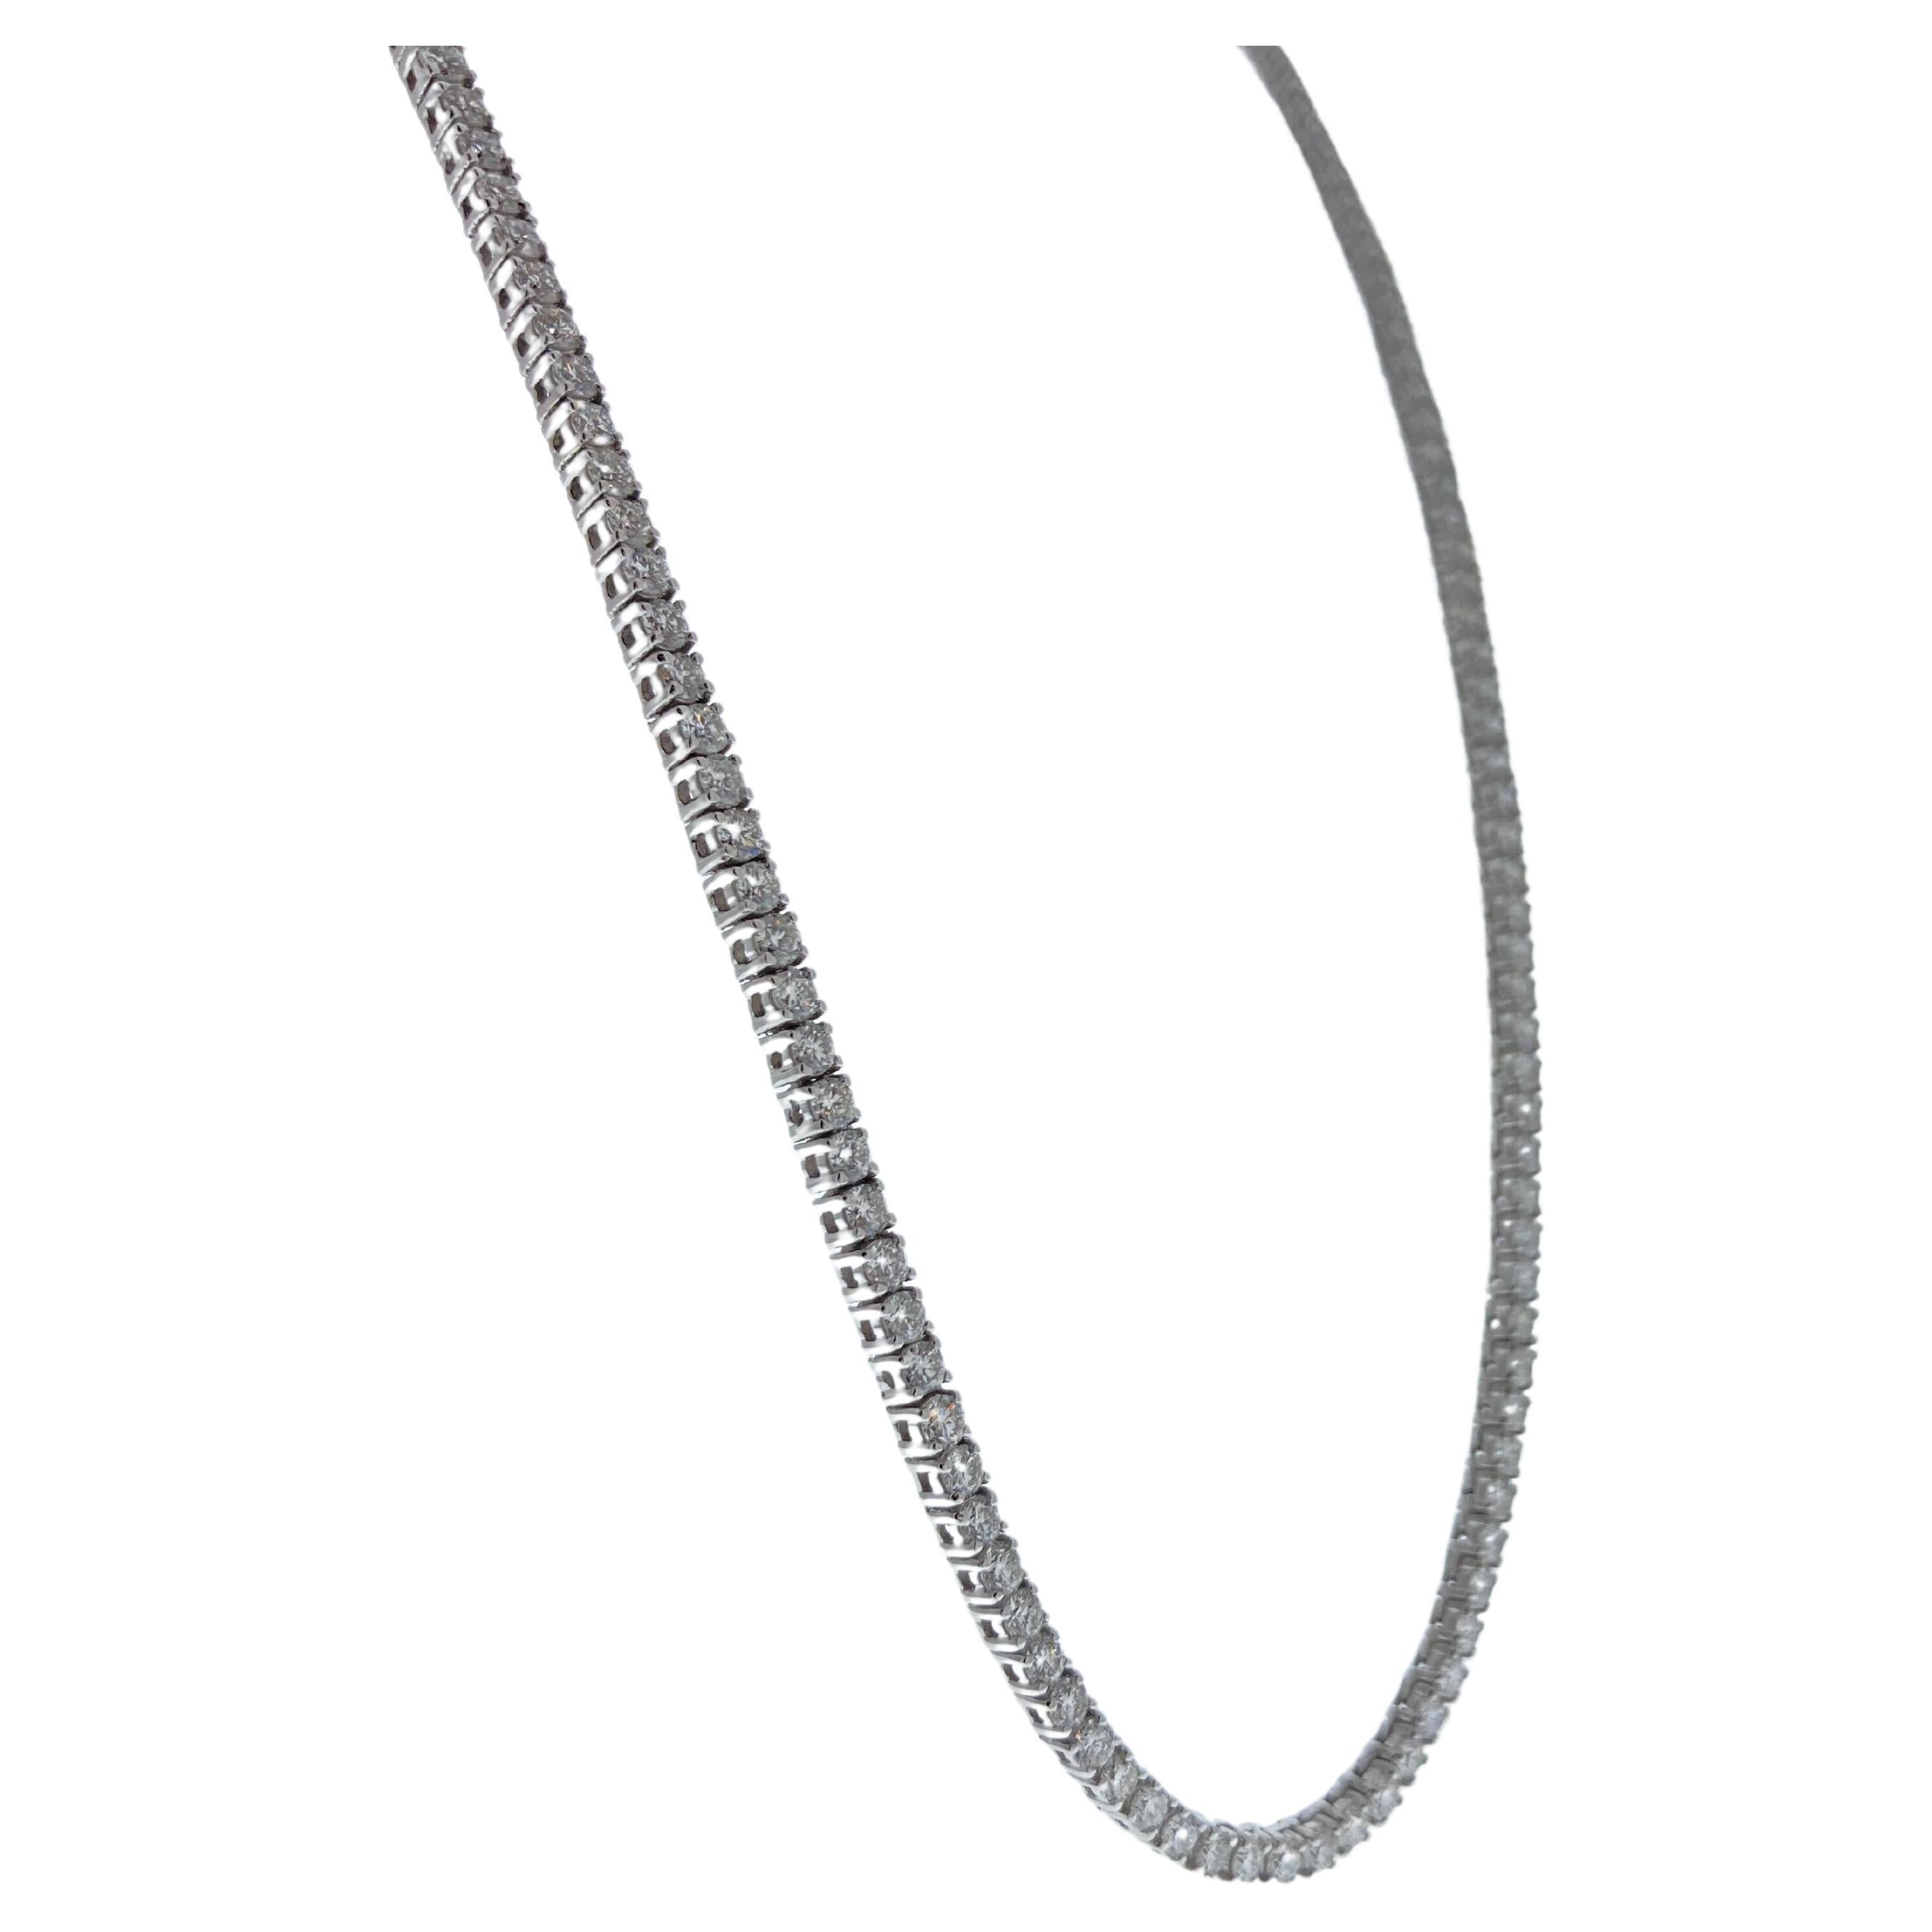 10.00 Carat Round Diamond Tennis Necklaces In 14k White Gold For Sale